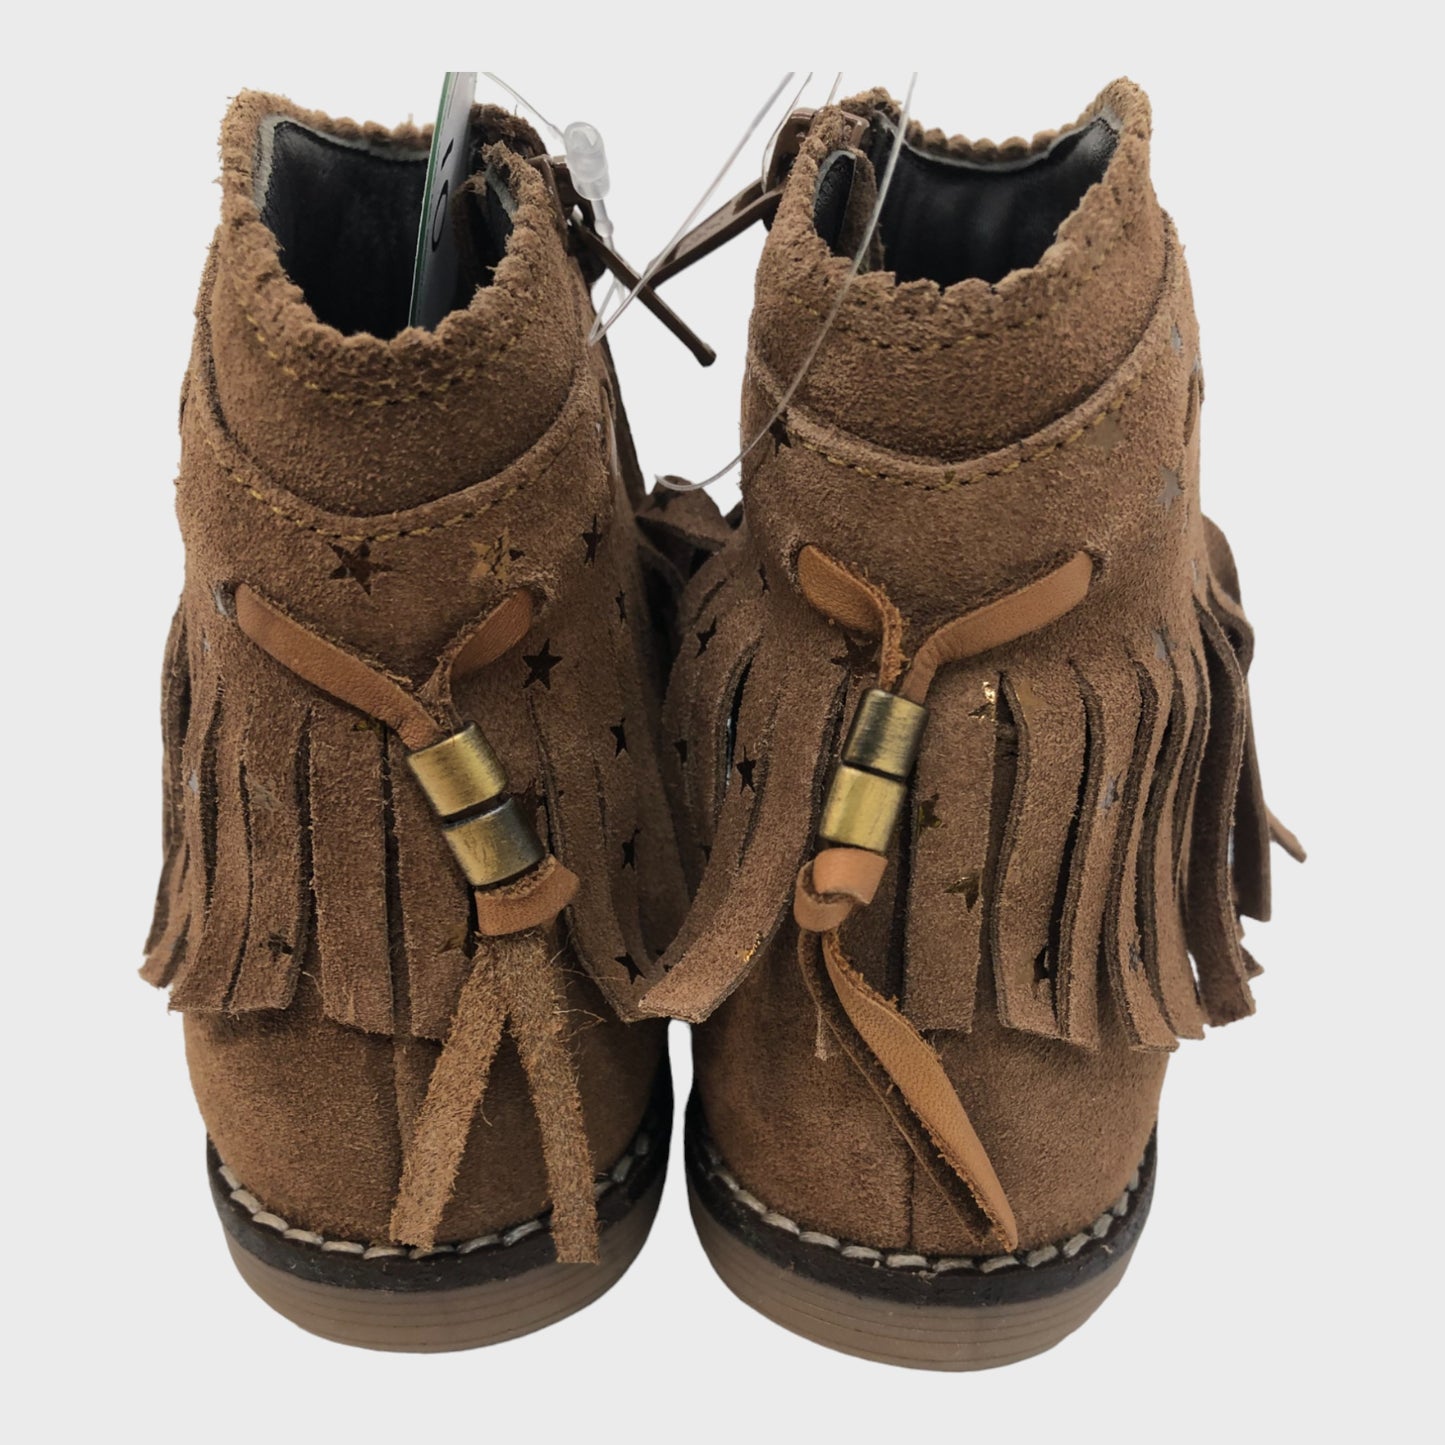 Girls Suede Fringed Ankle Boots